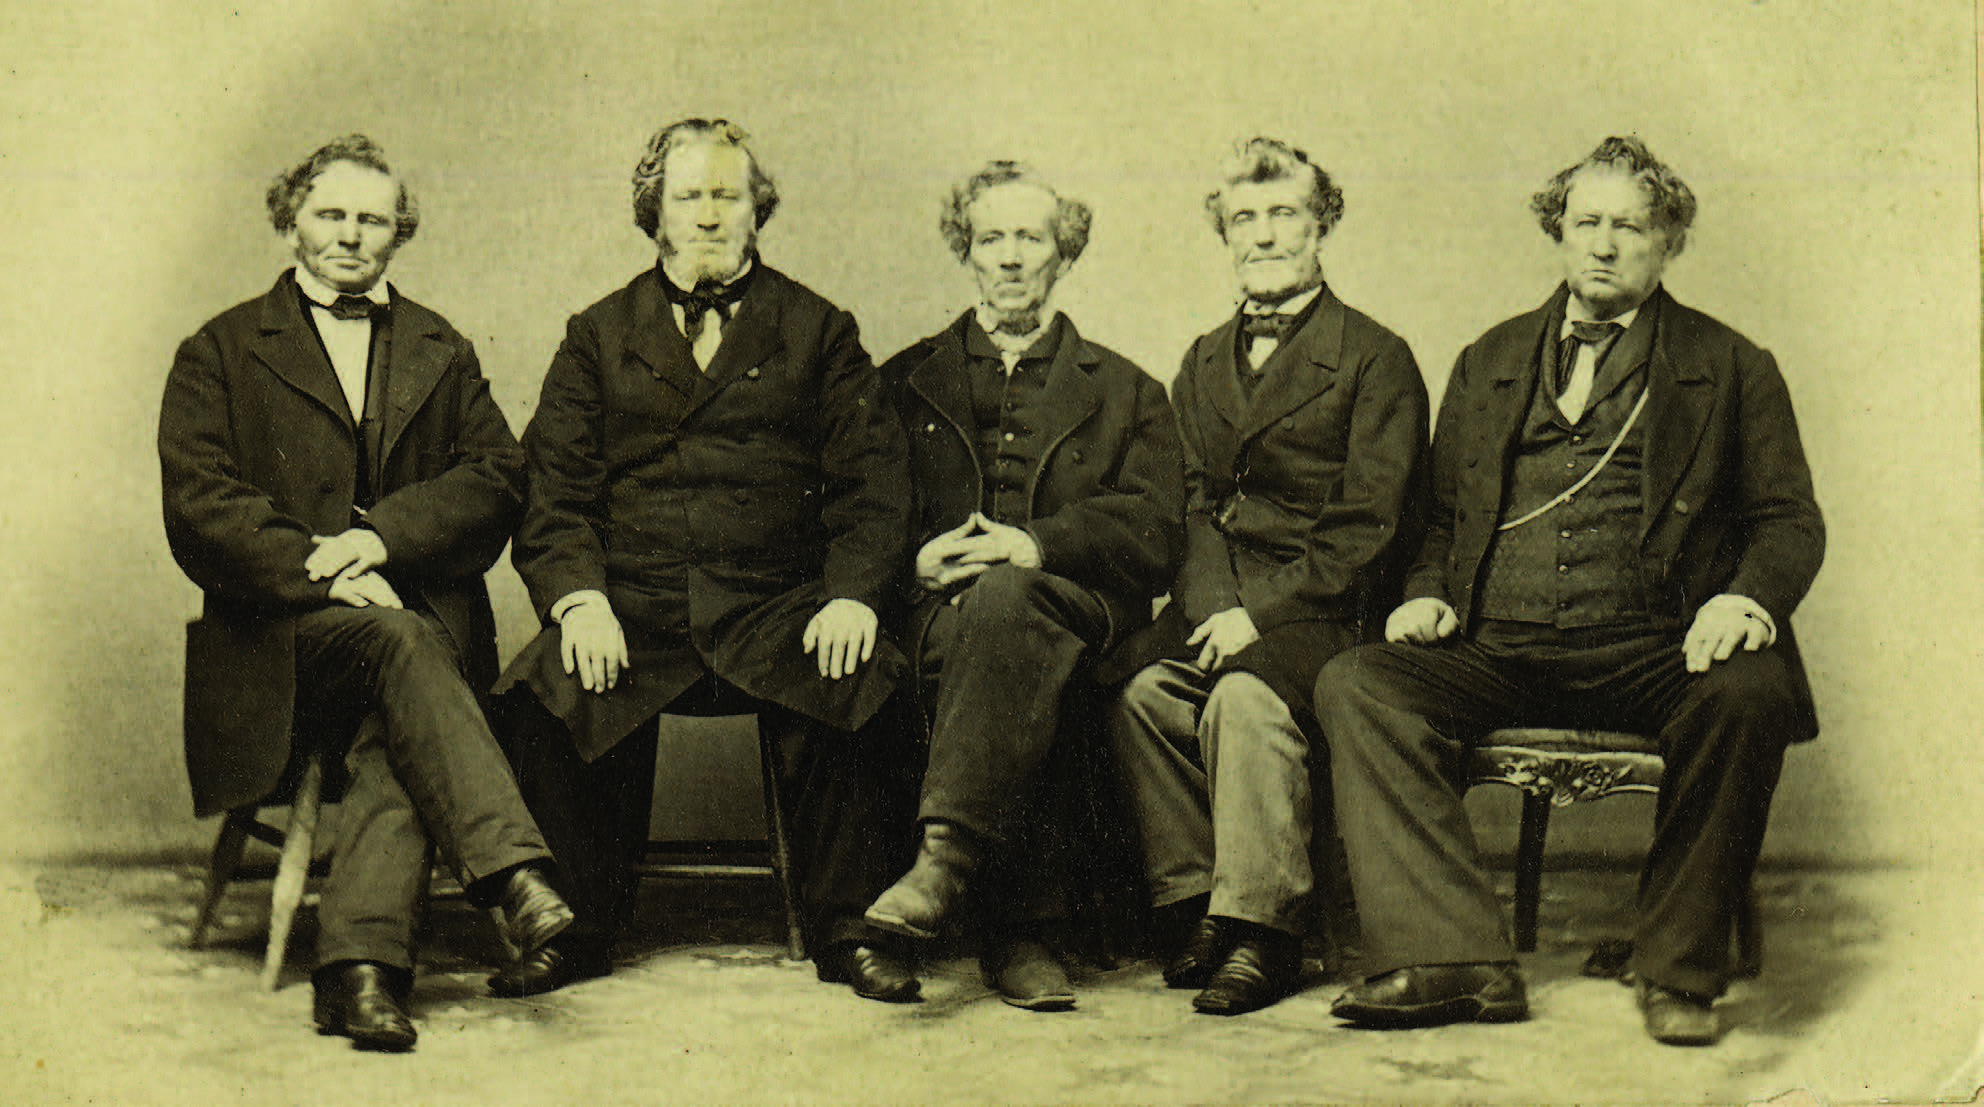 four brothers seated together